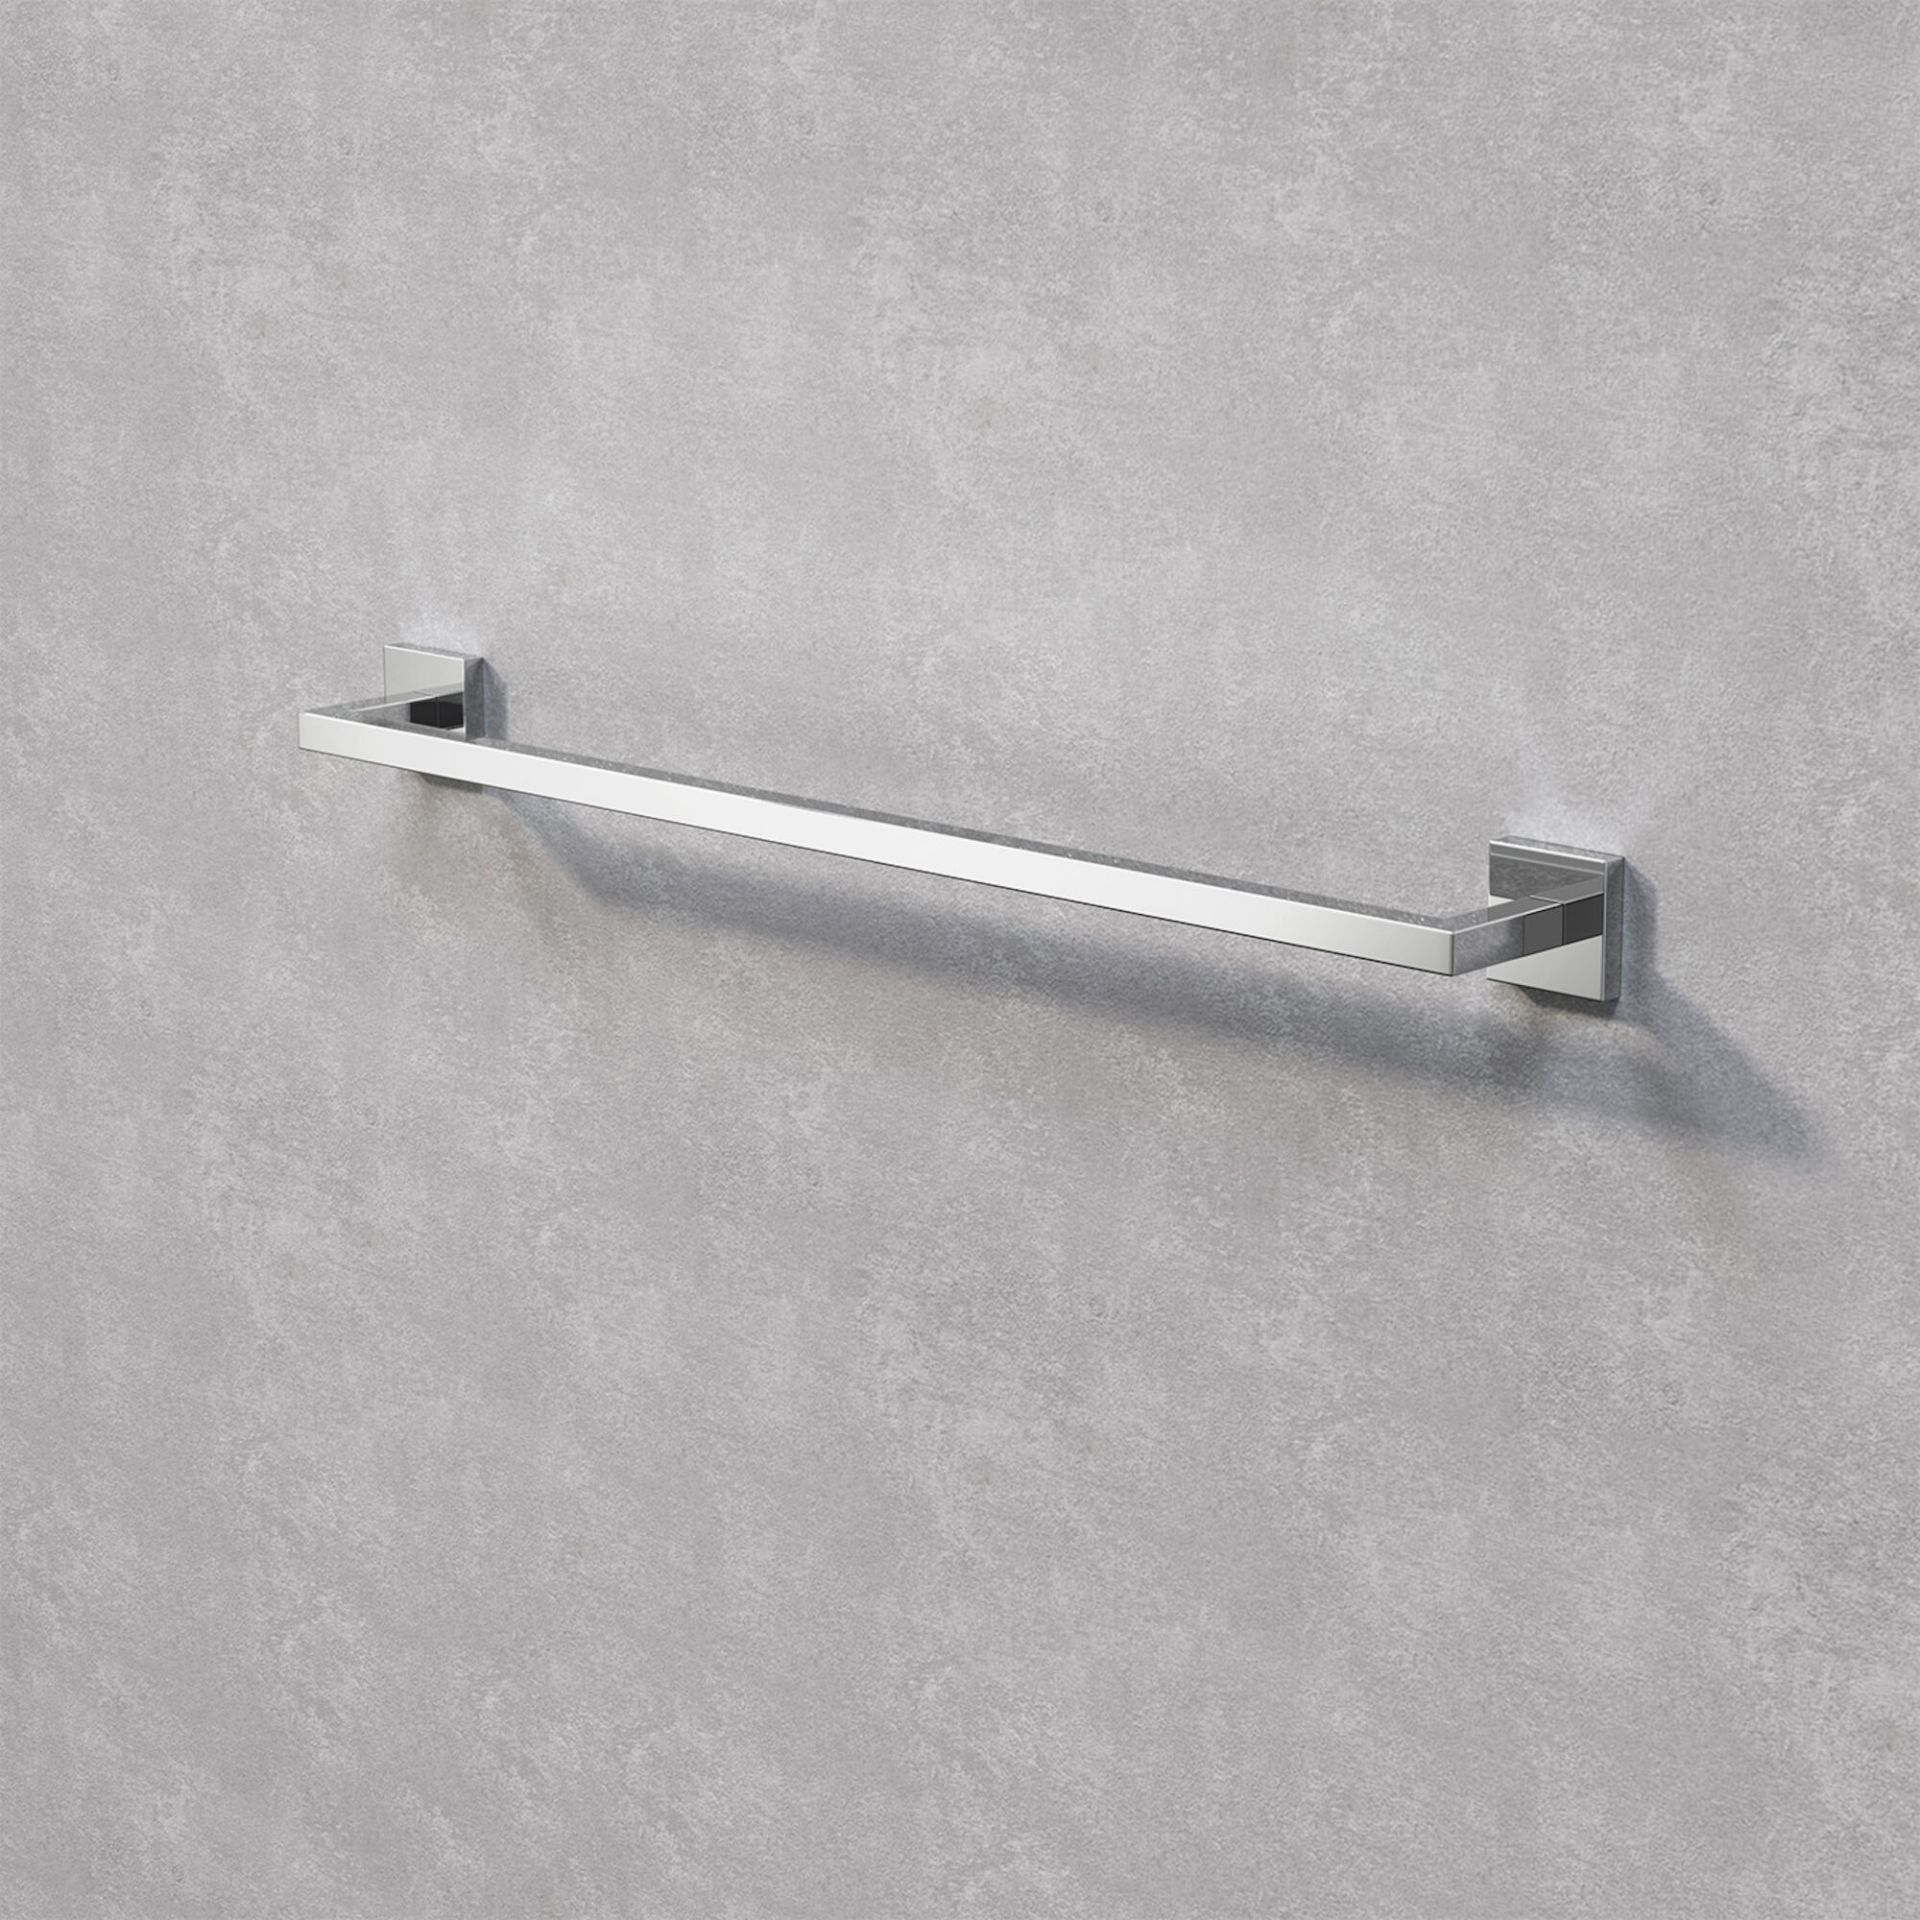 (E1020) Jesmond Towel Rail Finishes your bathroom with a little extra functionality and style ...